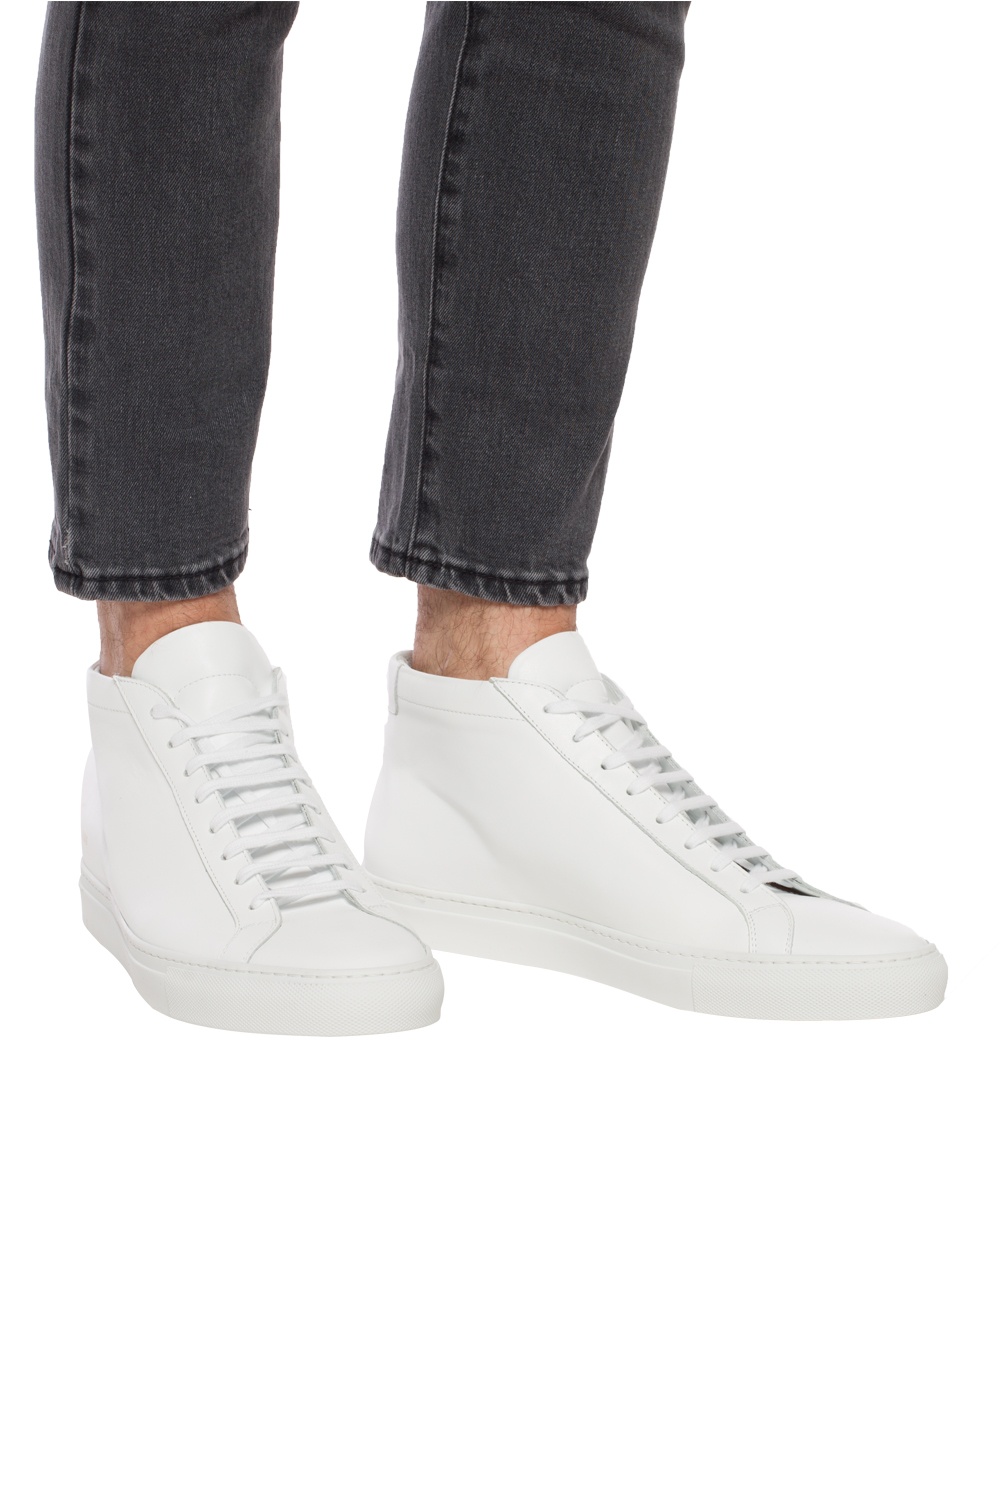 Original Achilles Leather High-Top Sneakers